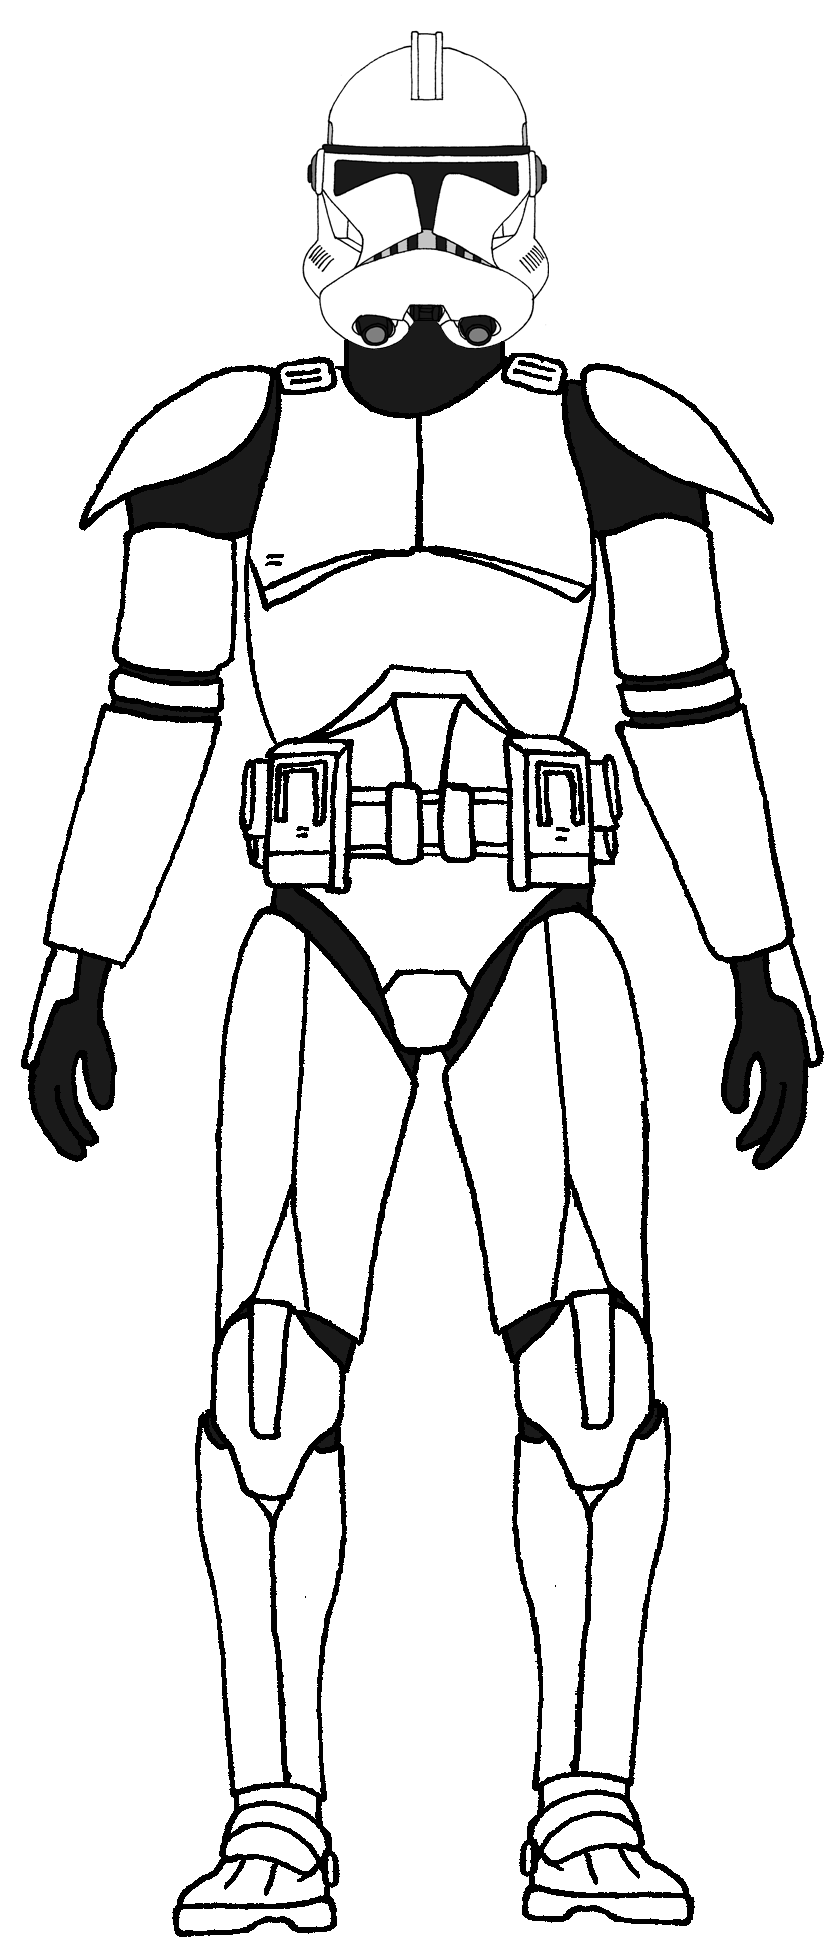 Clone trooper phase by historymaker on